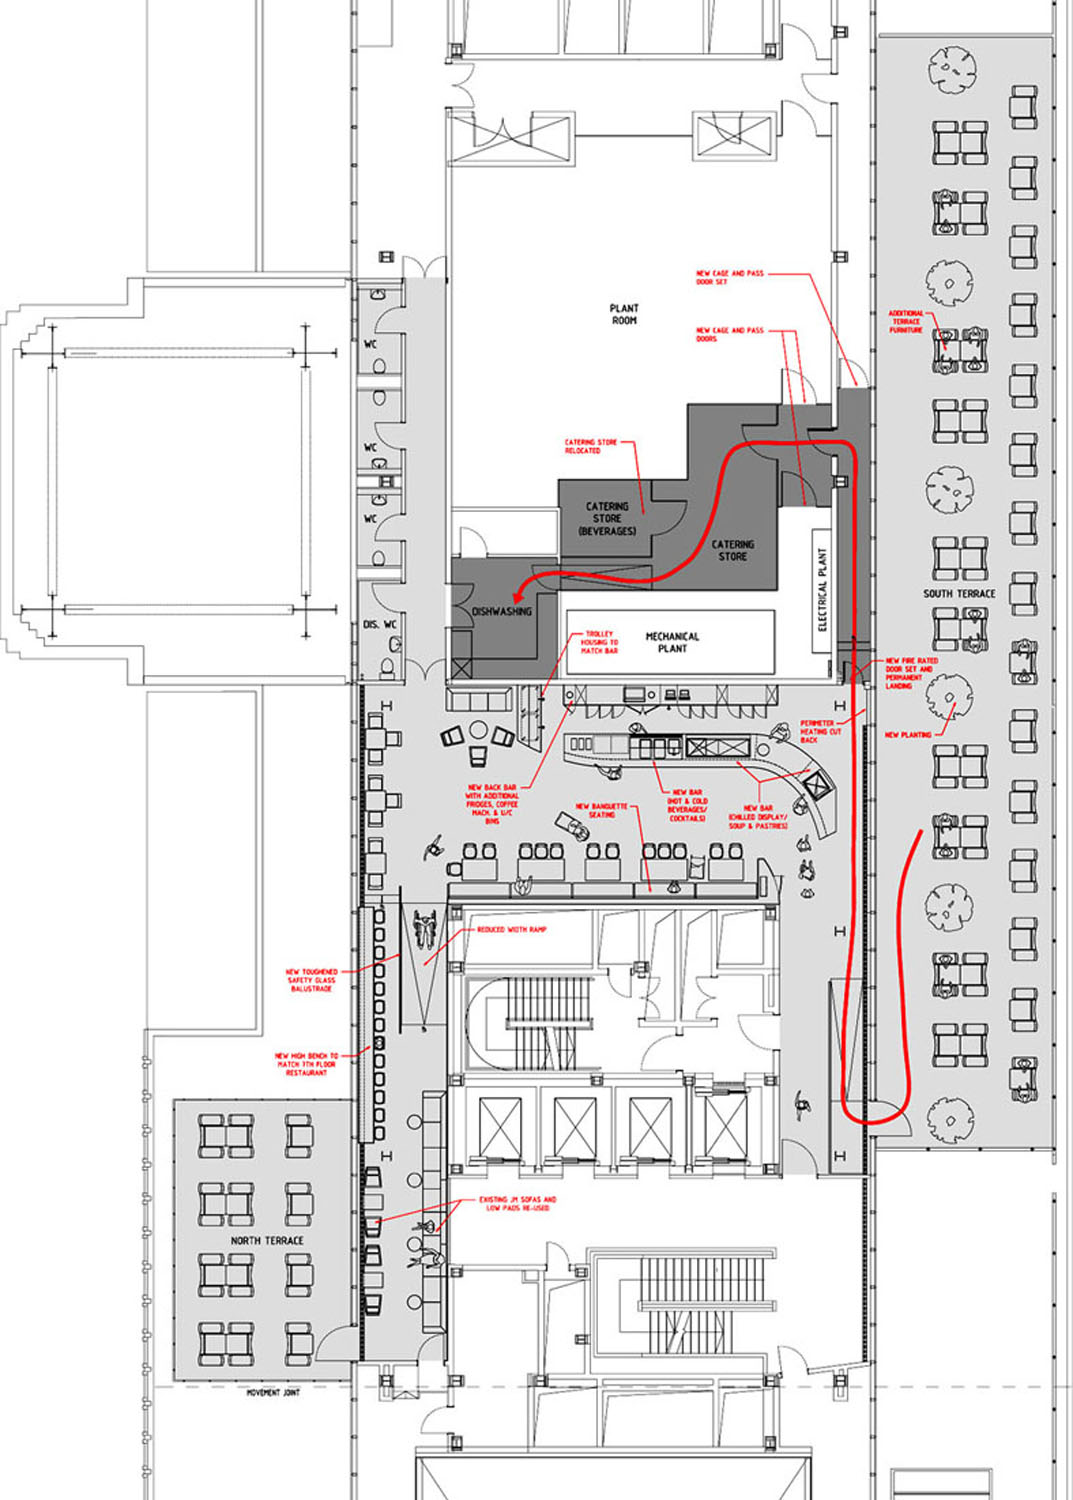 Tate New bar concept - base option with plant room route #2.jpg